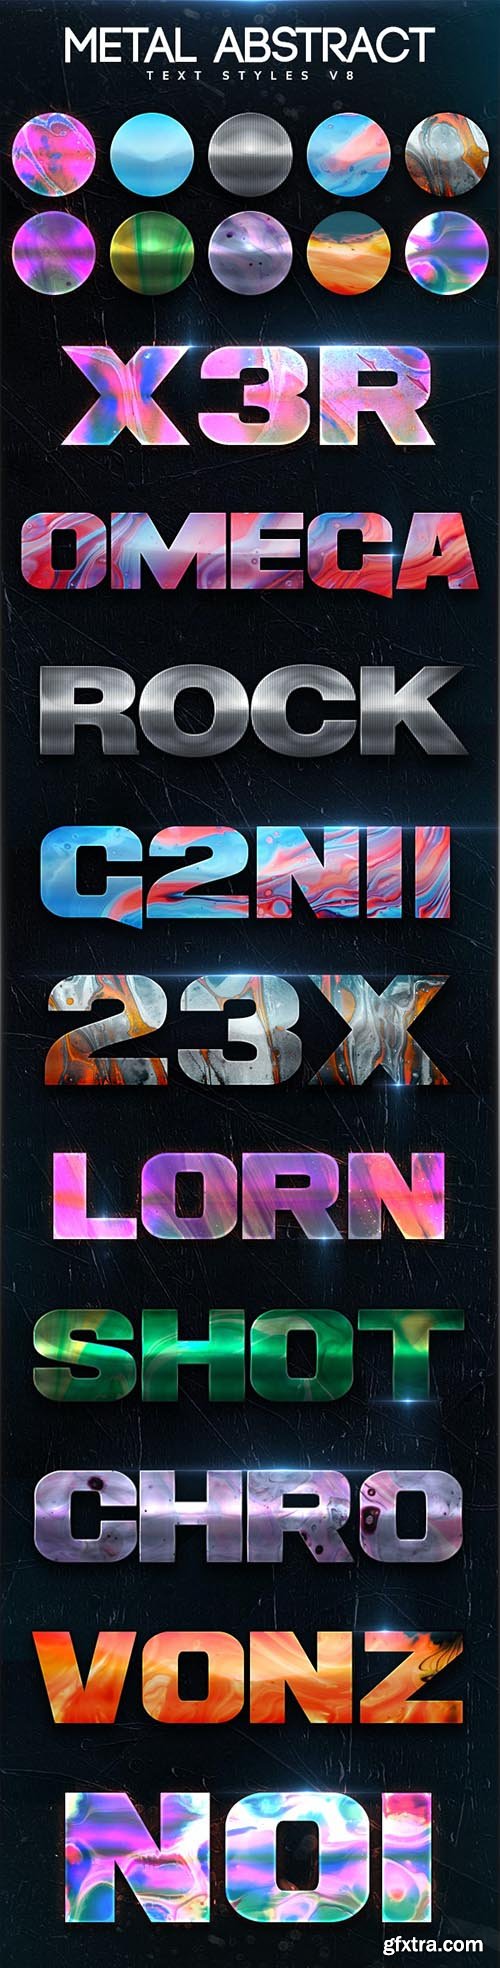 GraphicRiver - Metal Abstract Text Styles V8 26422140